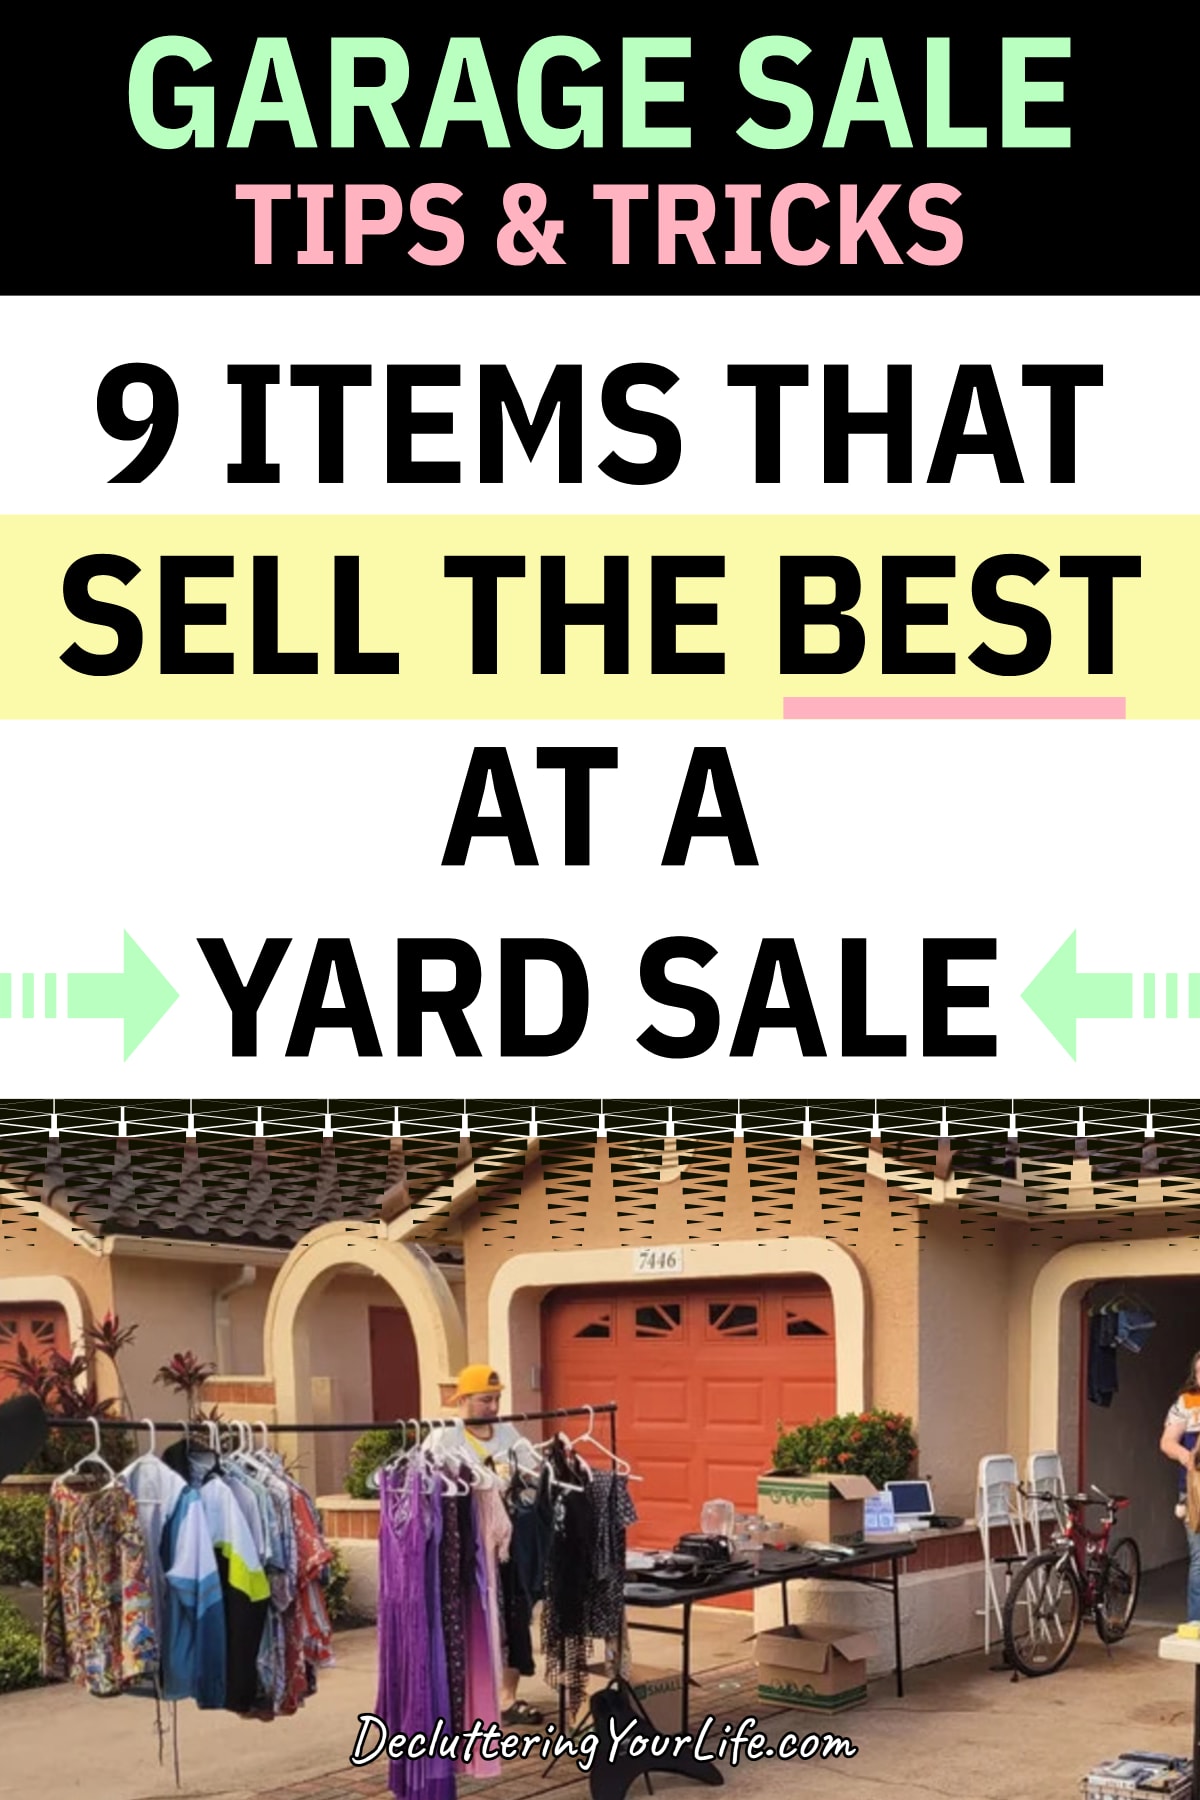 Garage Sale Tips and Tricks - 9 Items That Sell The BEST At A Yard Sale